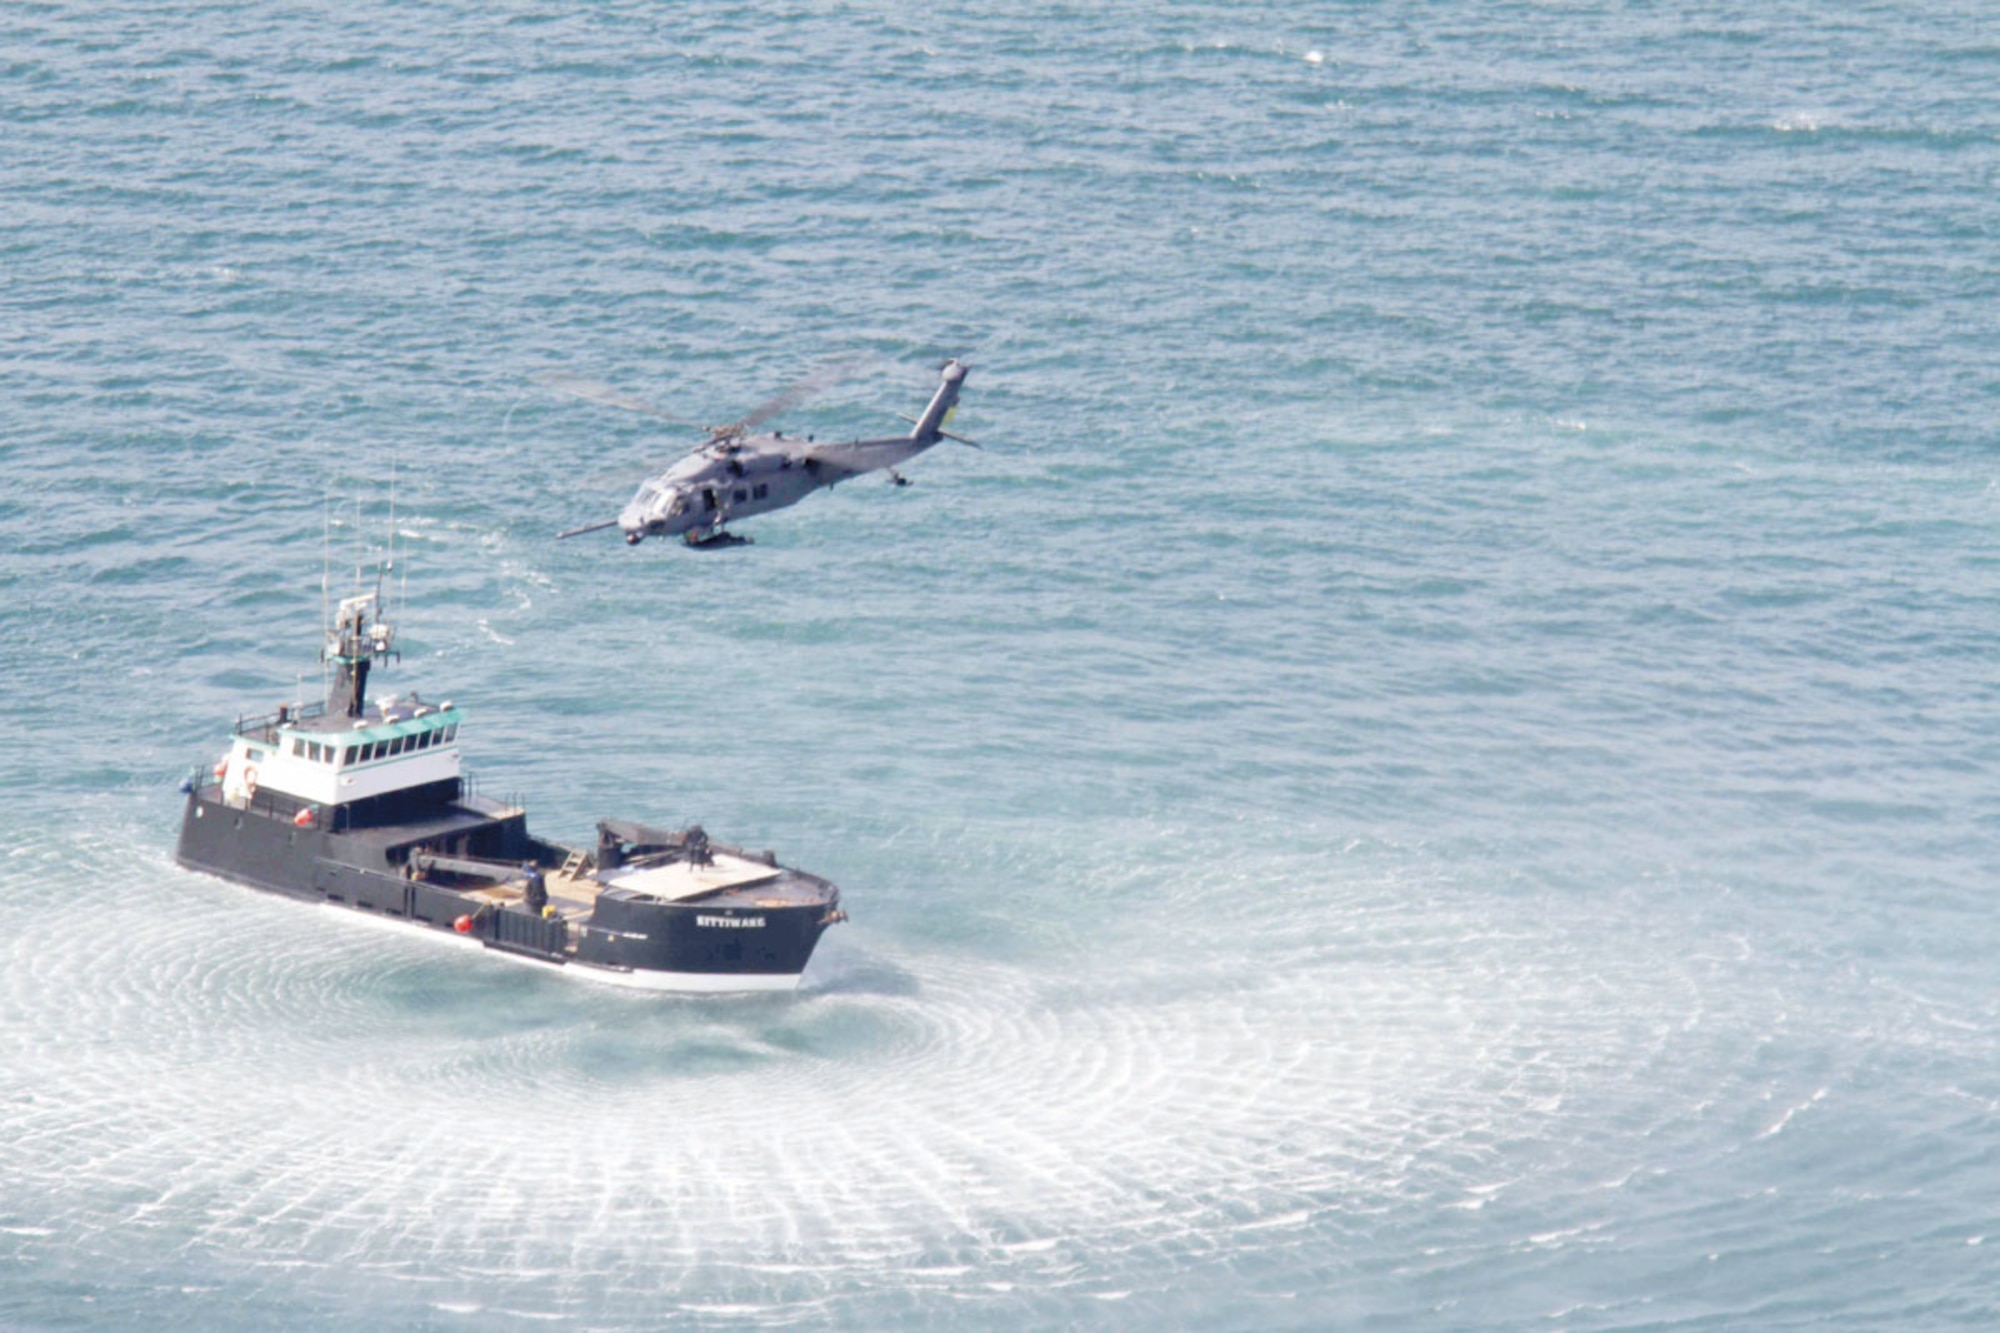 An Alaska Air National Guard HH-60 Pave Hawk helicopter hovers above the F/V Kittywake to hoist a pararescueman and victim during a water training exercise June 30. The training was documented by a camera crew from Discovery Channel’s “Surviving the Cut” for an upcoming season. (U.S. Air Force photo/2nd Lt. Bernie Kale)